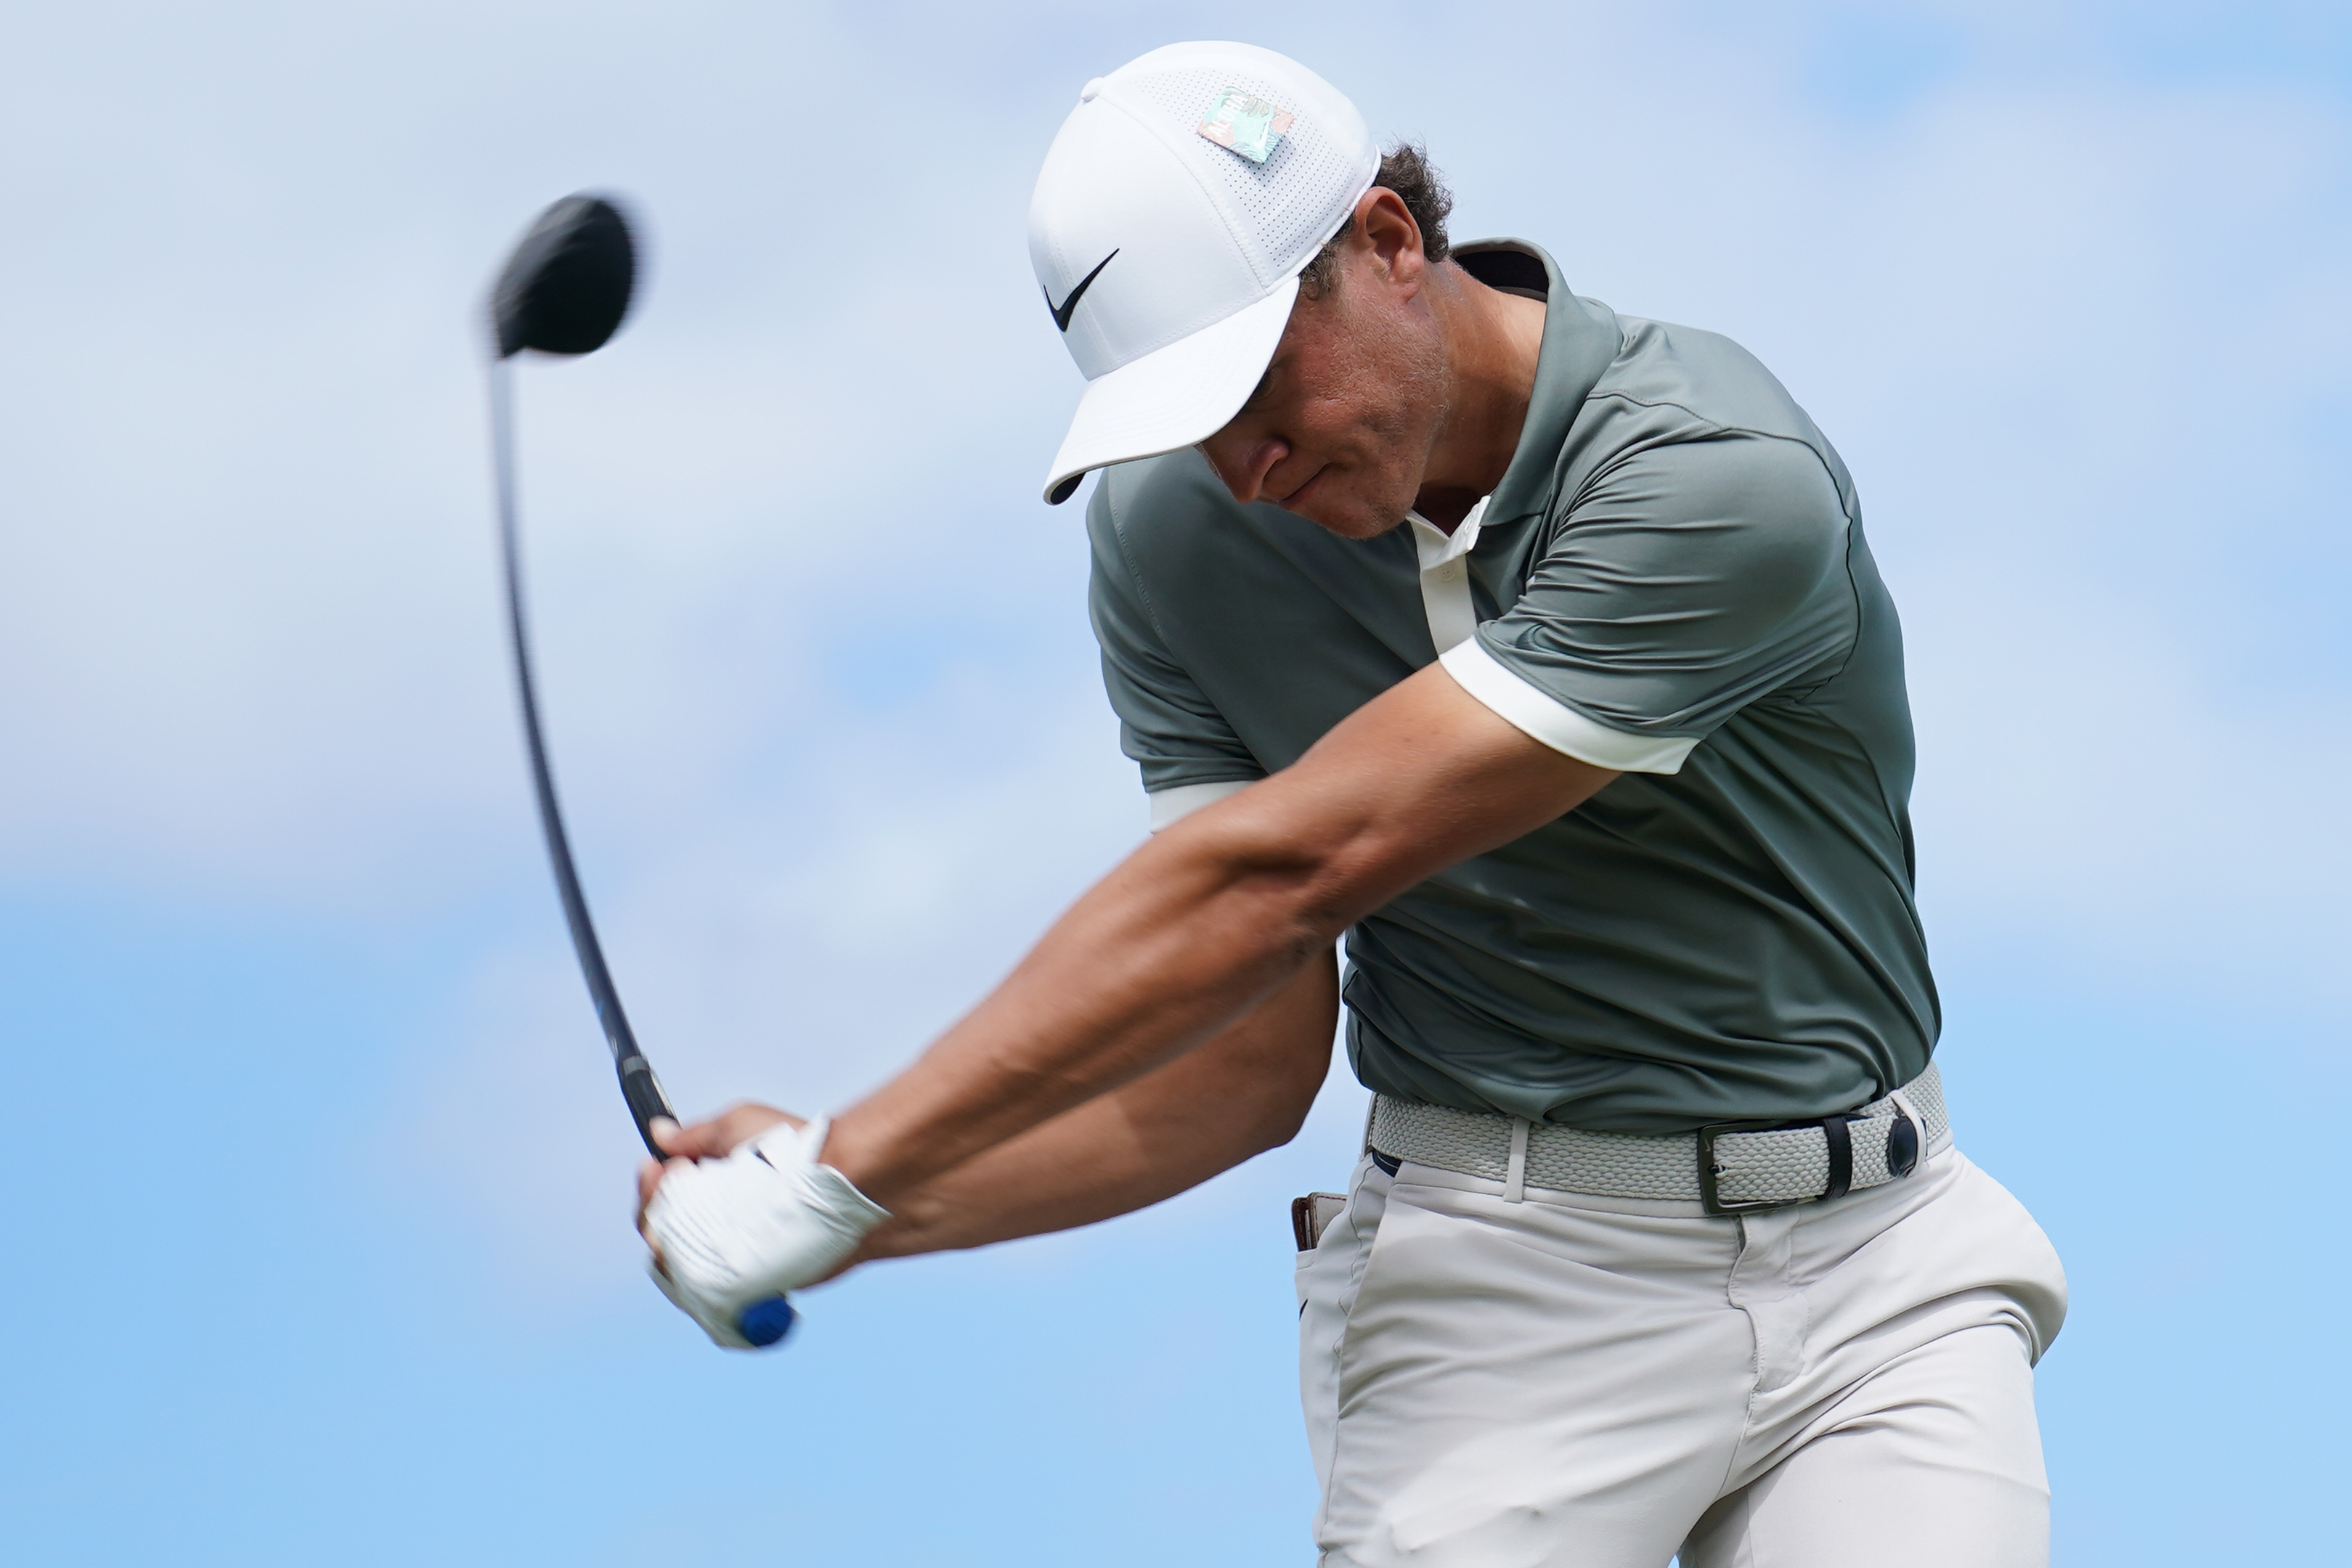 Simple Cameron Champ Workout for push your ABS